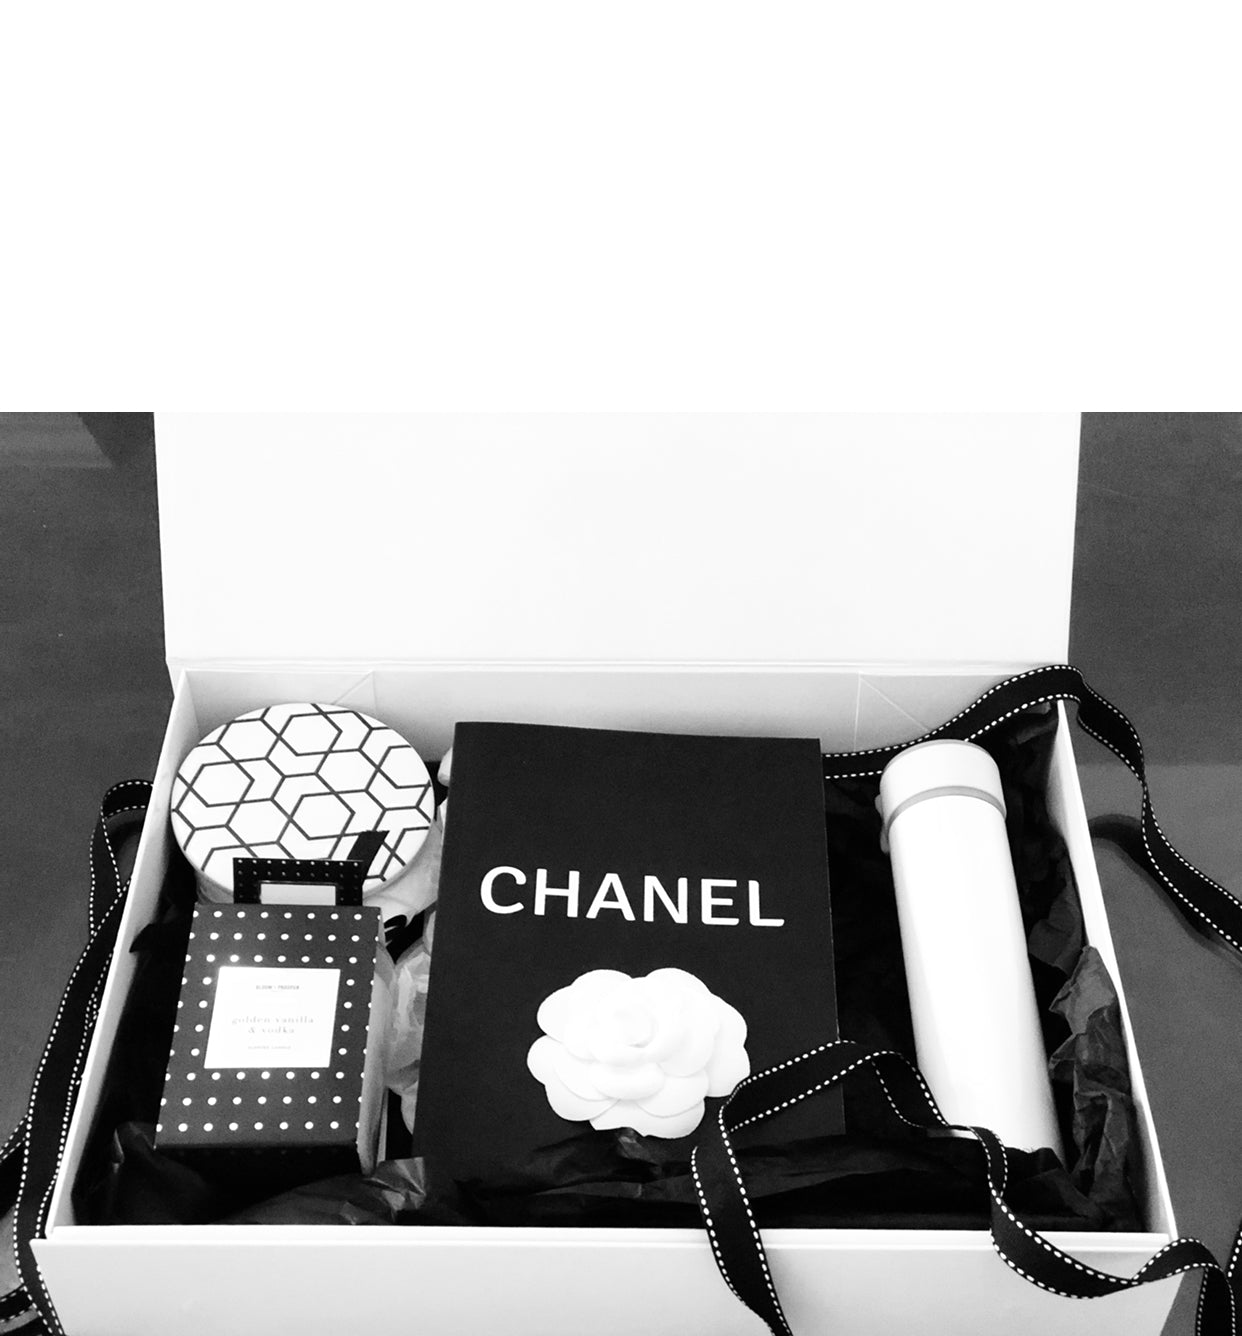 chanel gift boxes